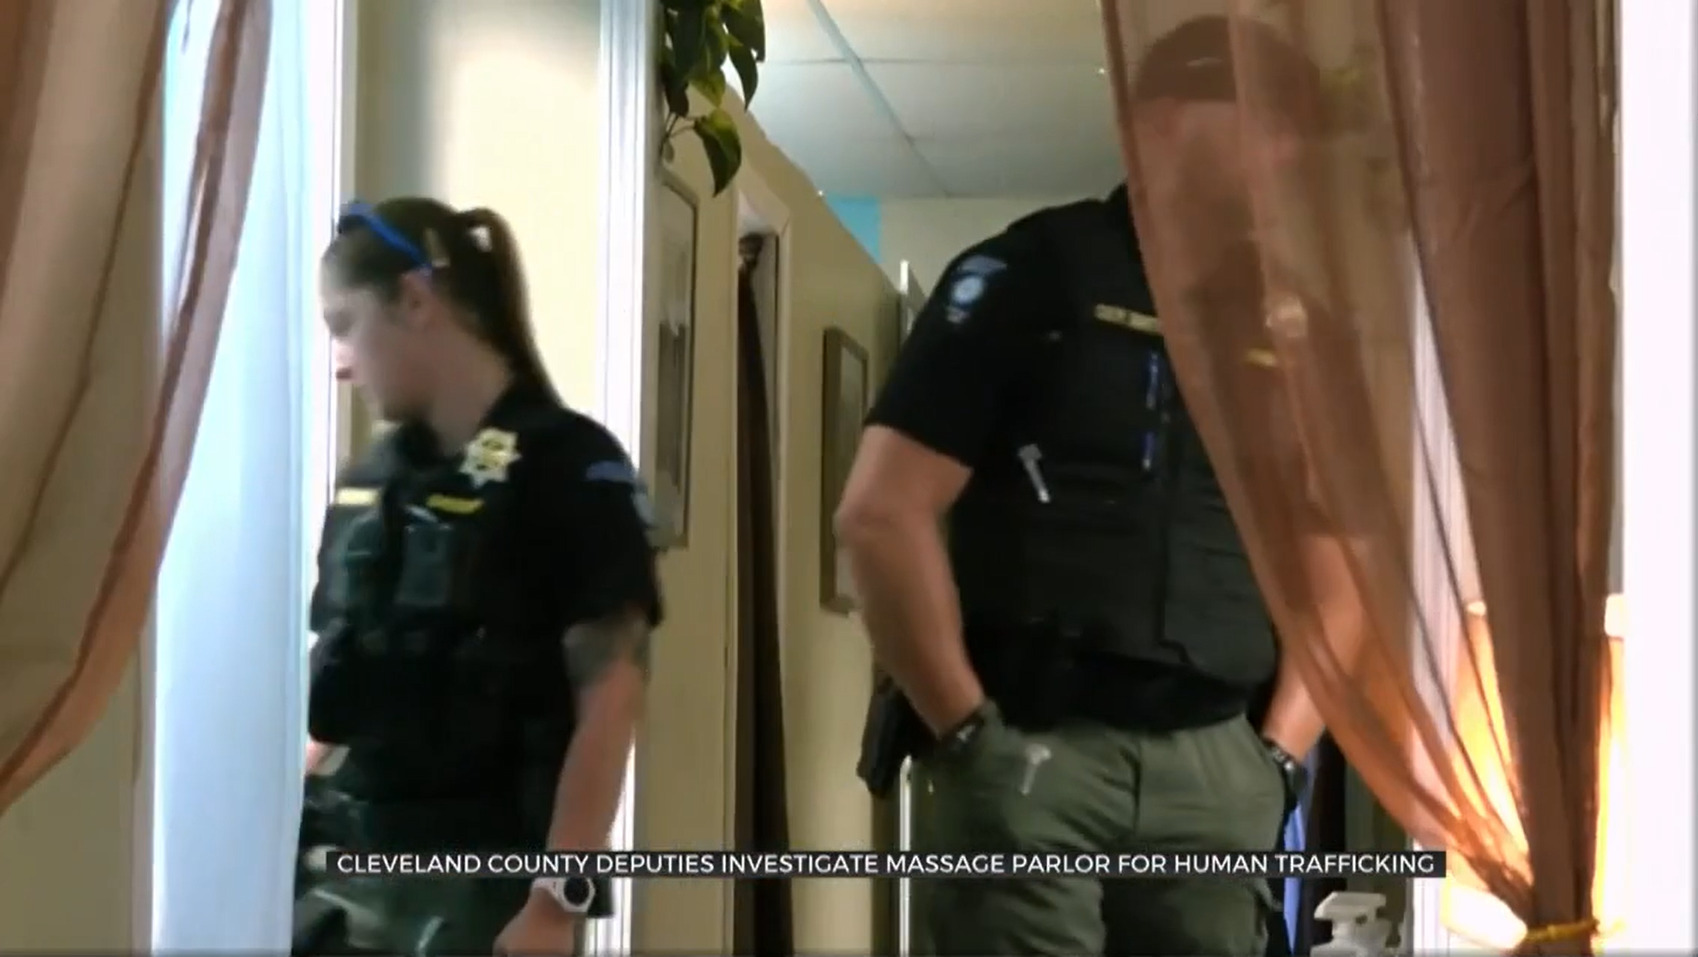 Cleveland Co. Sheriff Investigating Human Trafficking In Massage Parlor